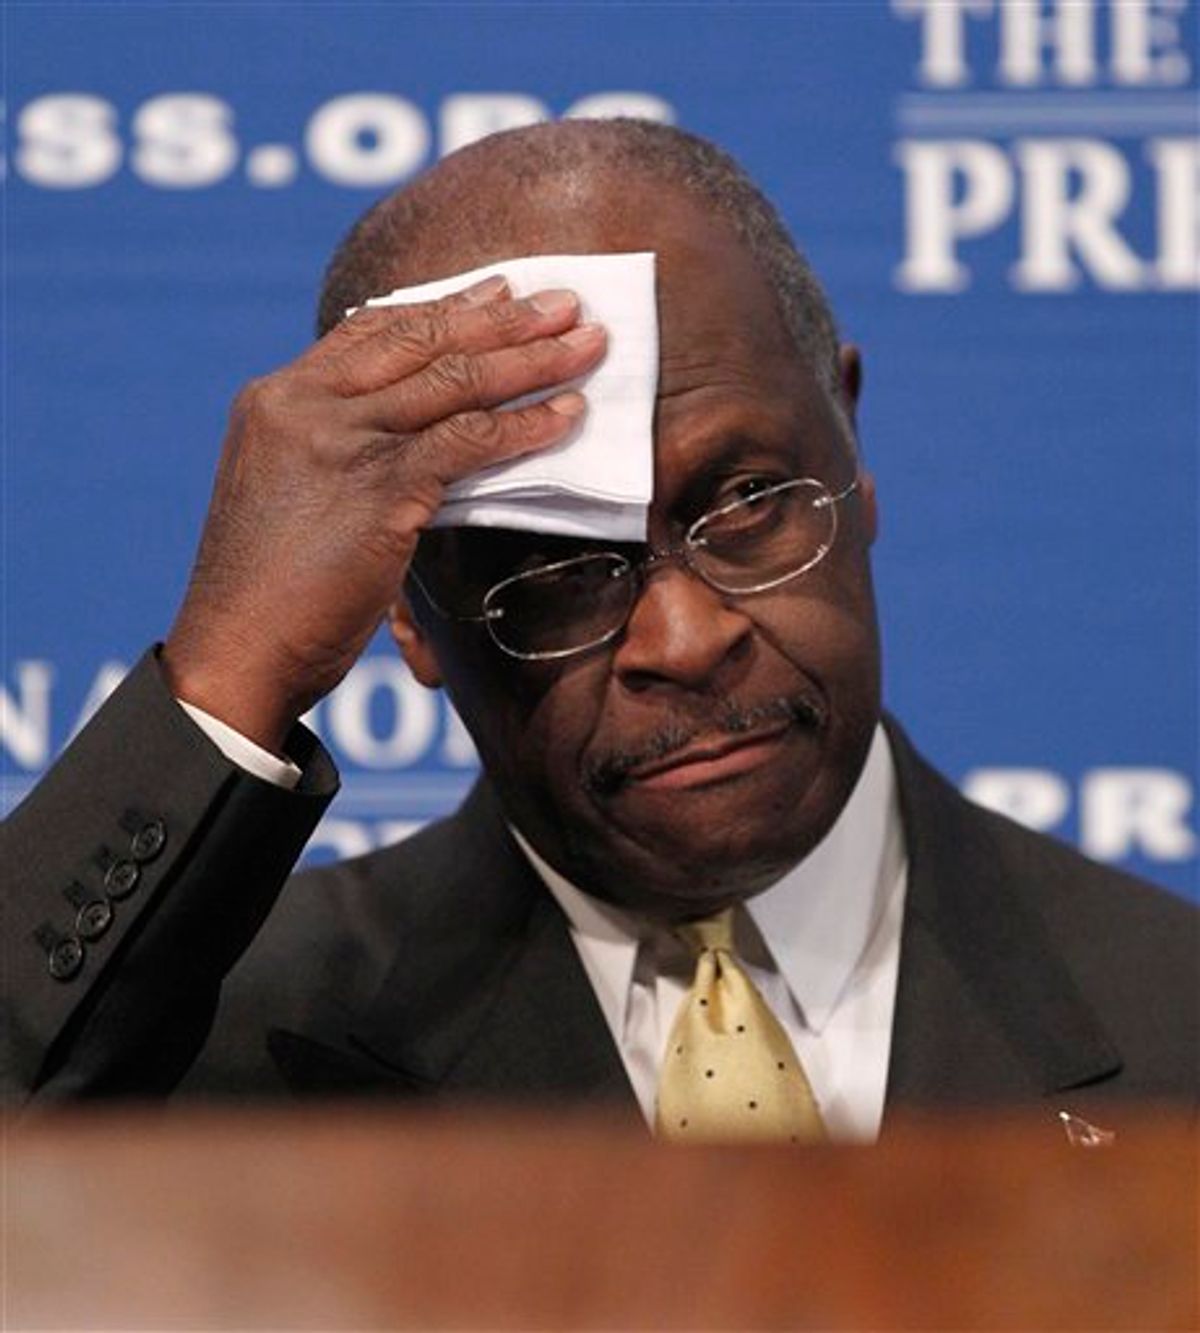 Republican presidential candidate, Herman Cain wipes his forehead before answering questions at the National Press Club in Washington, Monday, Oct., 31, 2011. Denying he sexually harassed anyone, Cain said Monday he was falsely accused in the 1990s while he was head of the National Restaurant Association, and he branded revelation of the allegations a "witch hunt.". (AP Photo/Pablo Martinez Monsivais)  (AP)